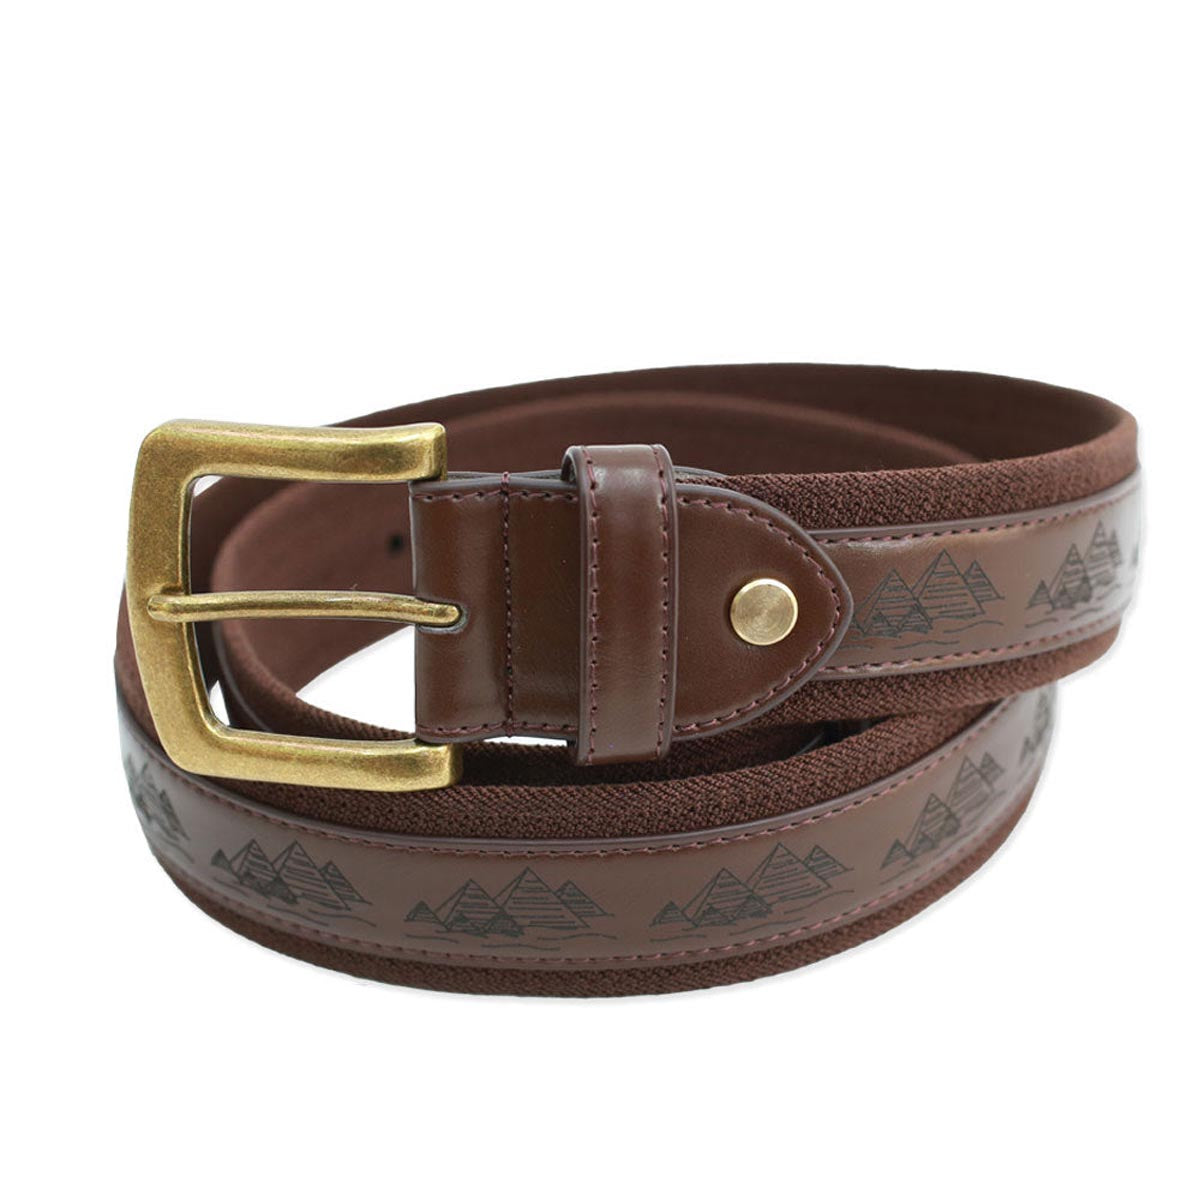 Theories As Above Vegan Leather Belt - Brown image 1